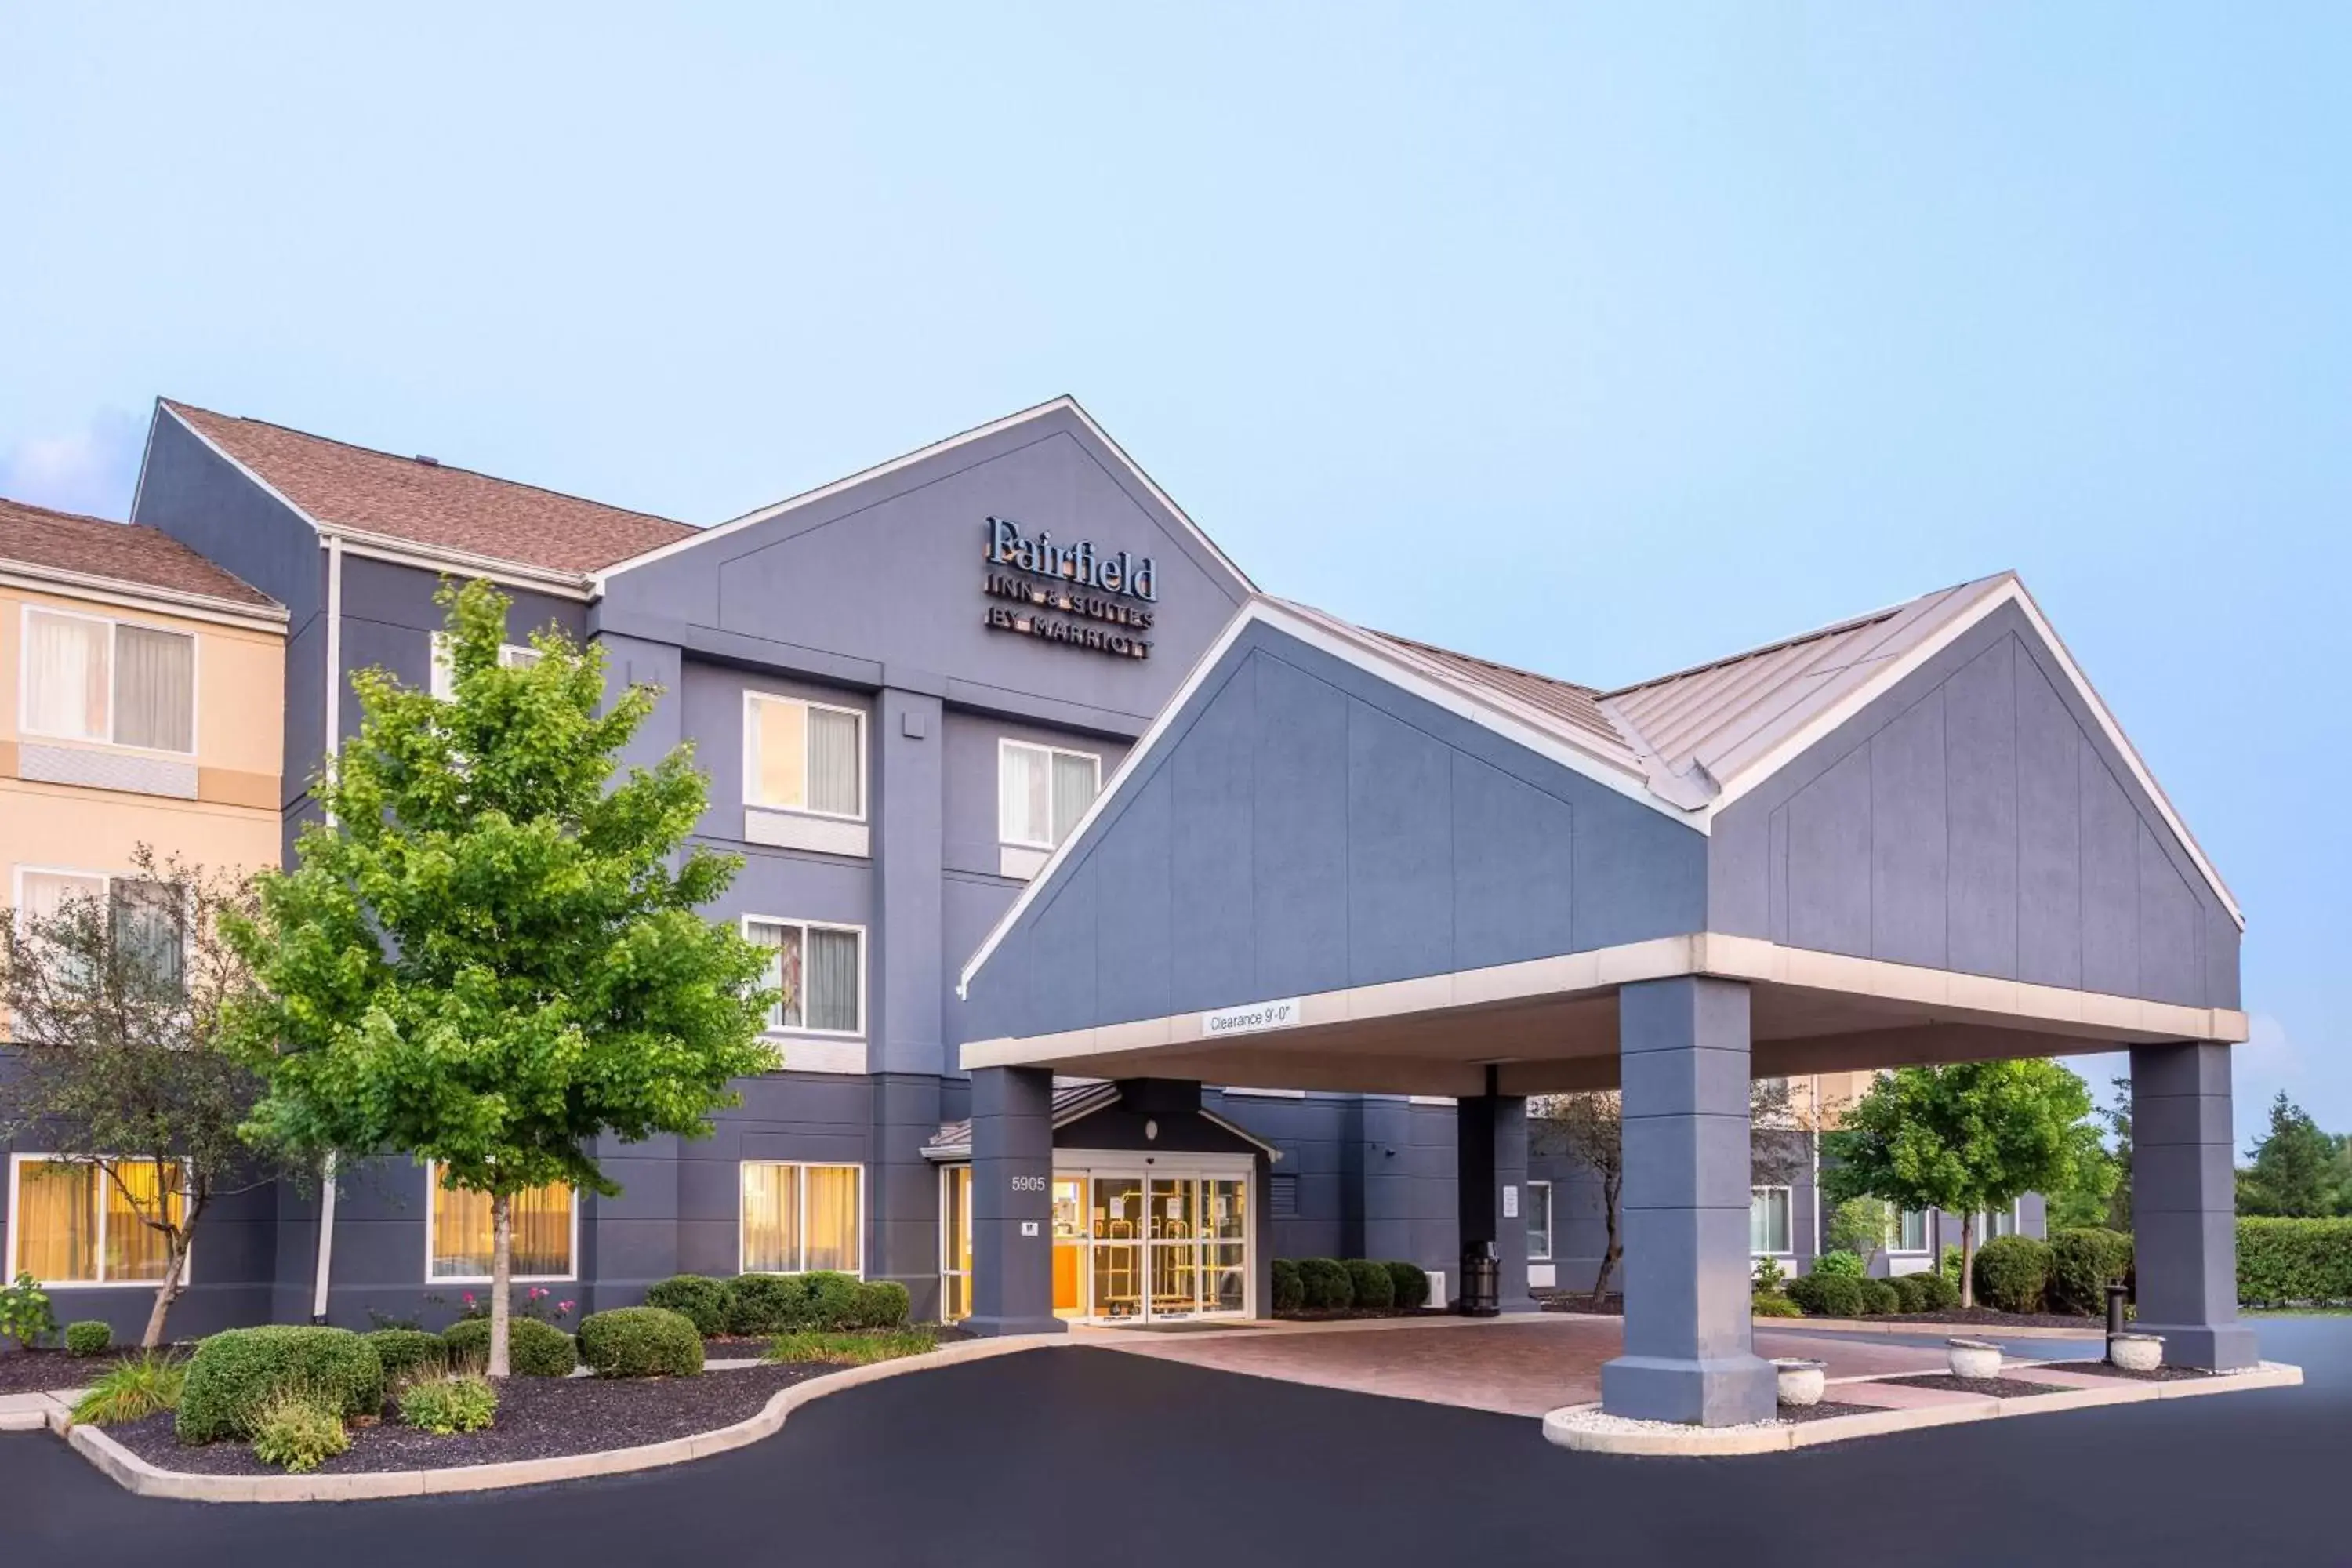 Property Building in Fairfield Inn & Suites Indianapolis Northwest